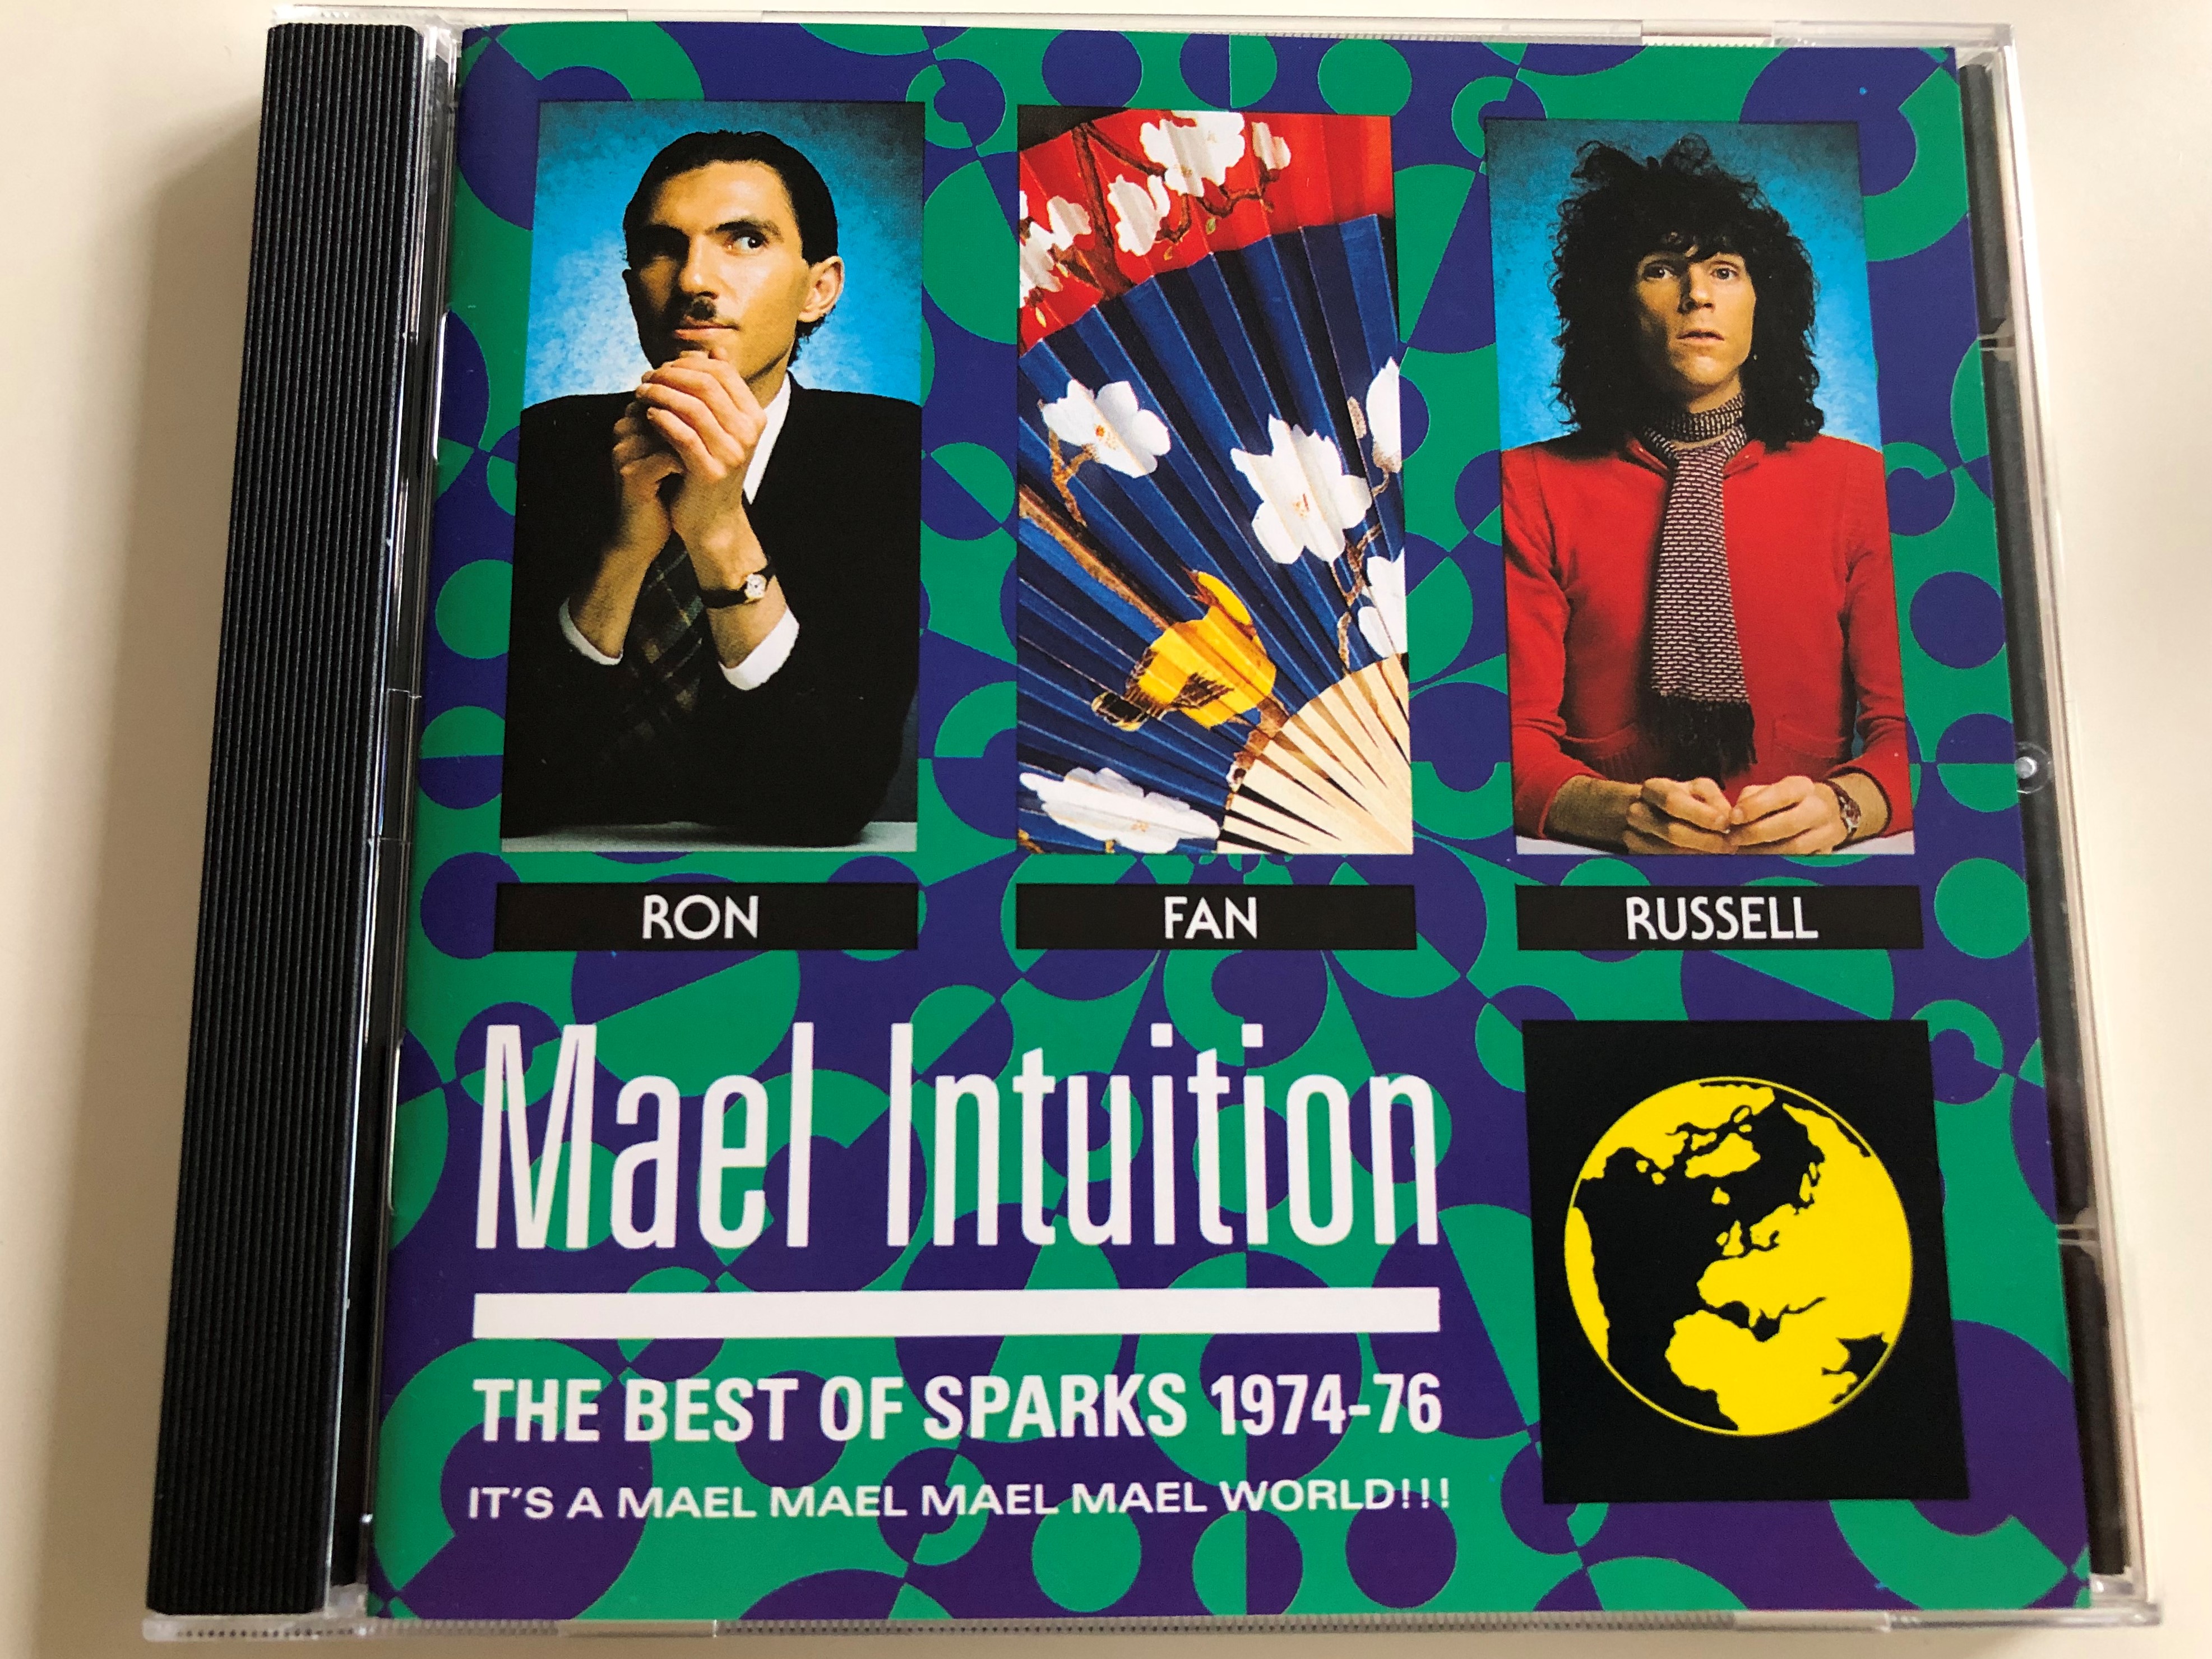 sparks-mael-intuition-the-best-of-sparks-1974-76-ron-fan-russel-audio-cd-1990-island-masters-imcd-88-1-.jpg